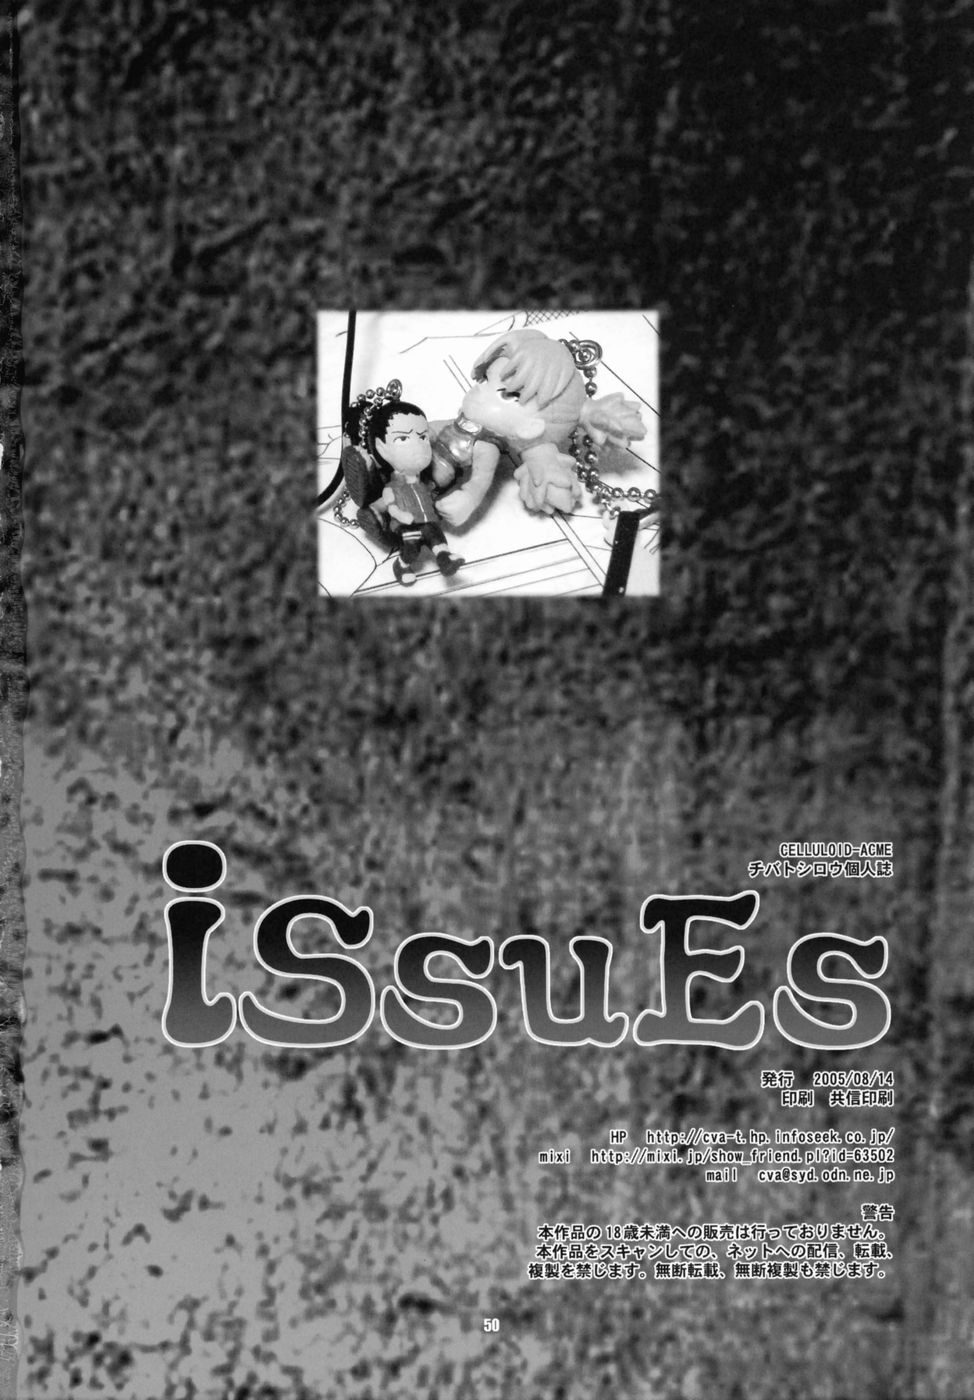 (C68) [Celluloid-Acme] Issues (Naruto) [English] [persepolis130] (C68) [Celluloid-Acme] Issues (ナルト) [英訳] [persepolis130]